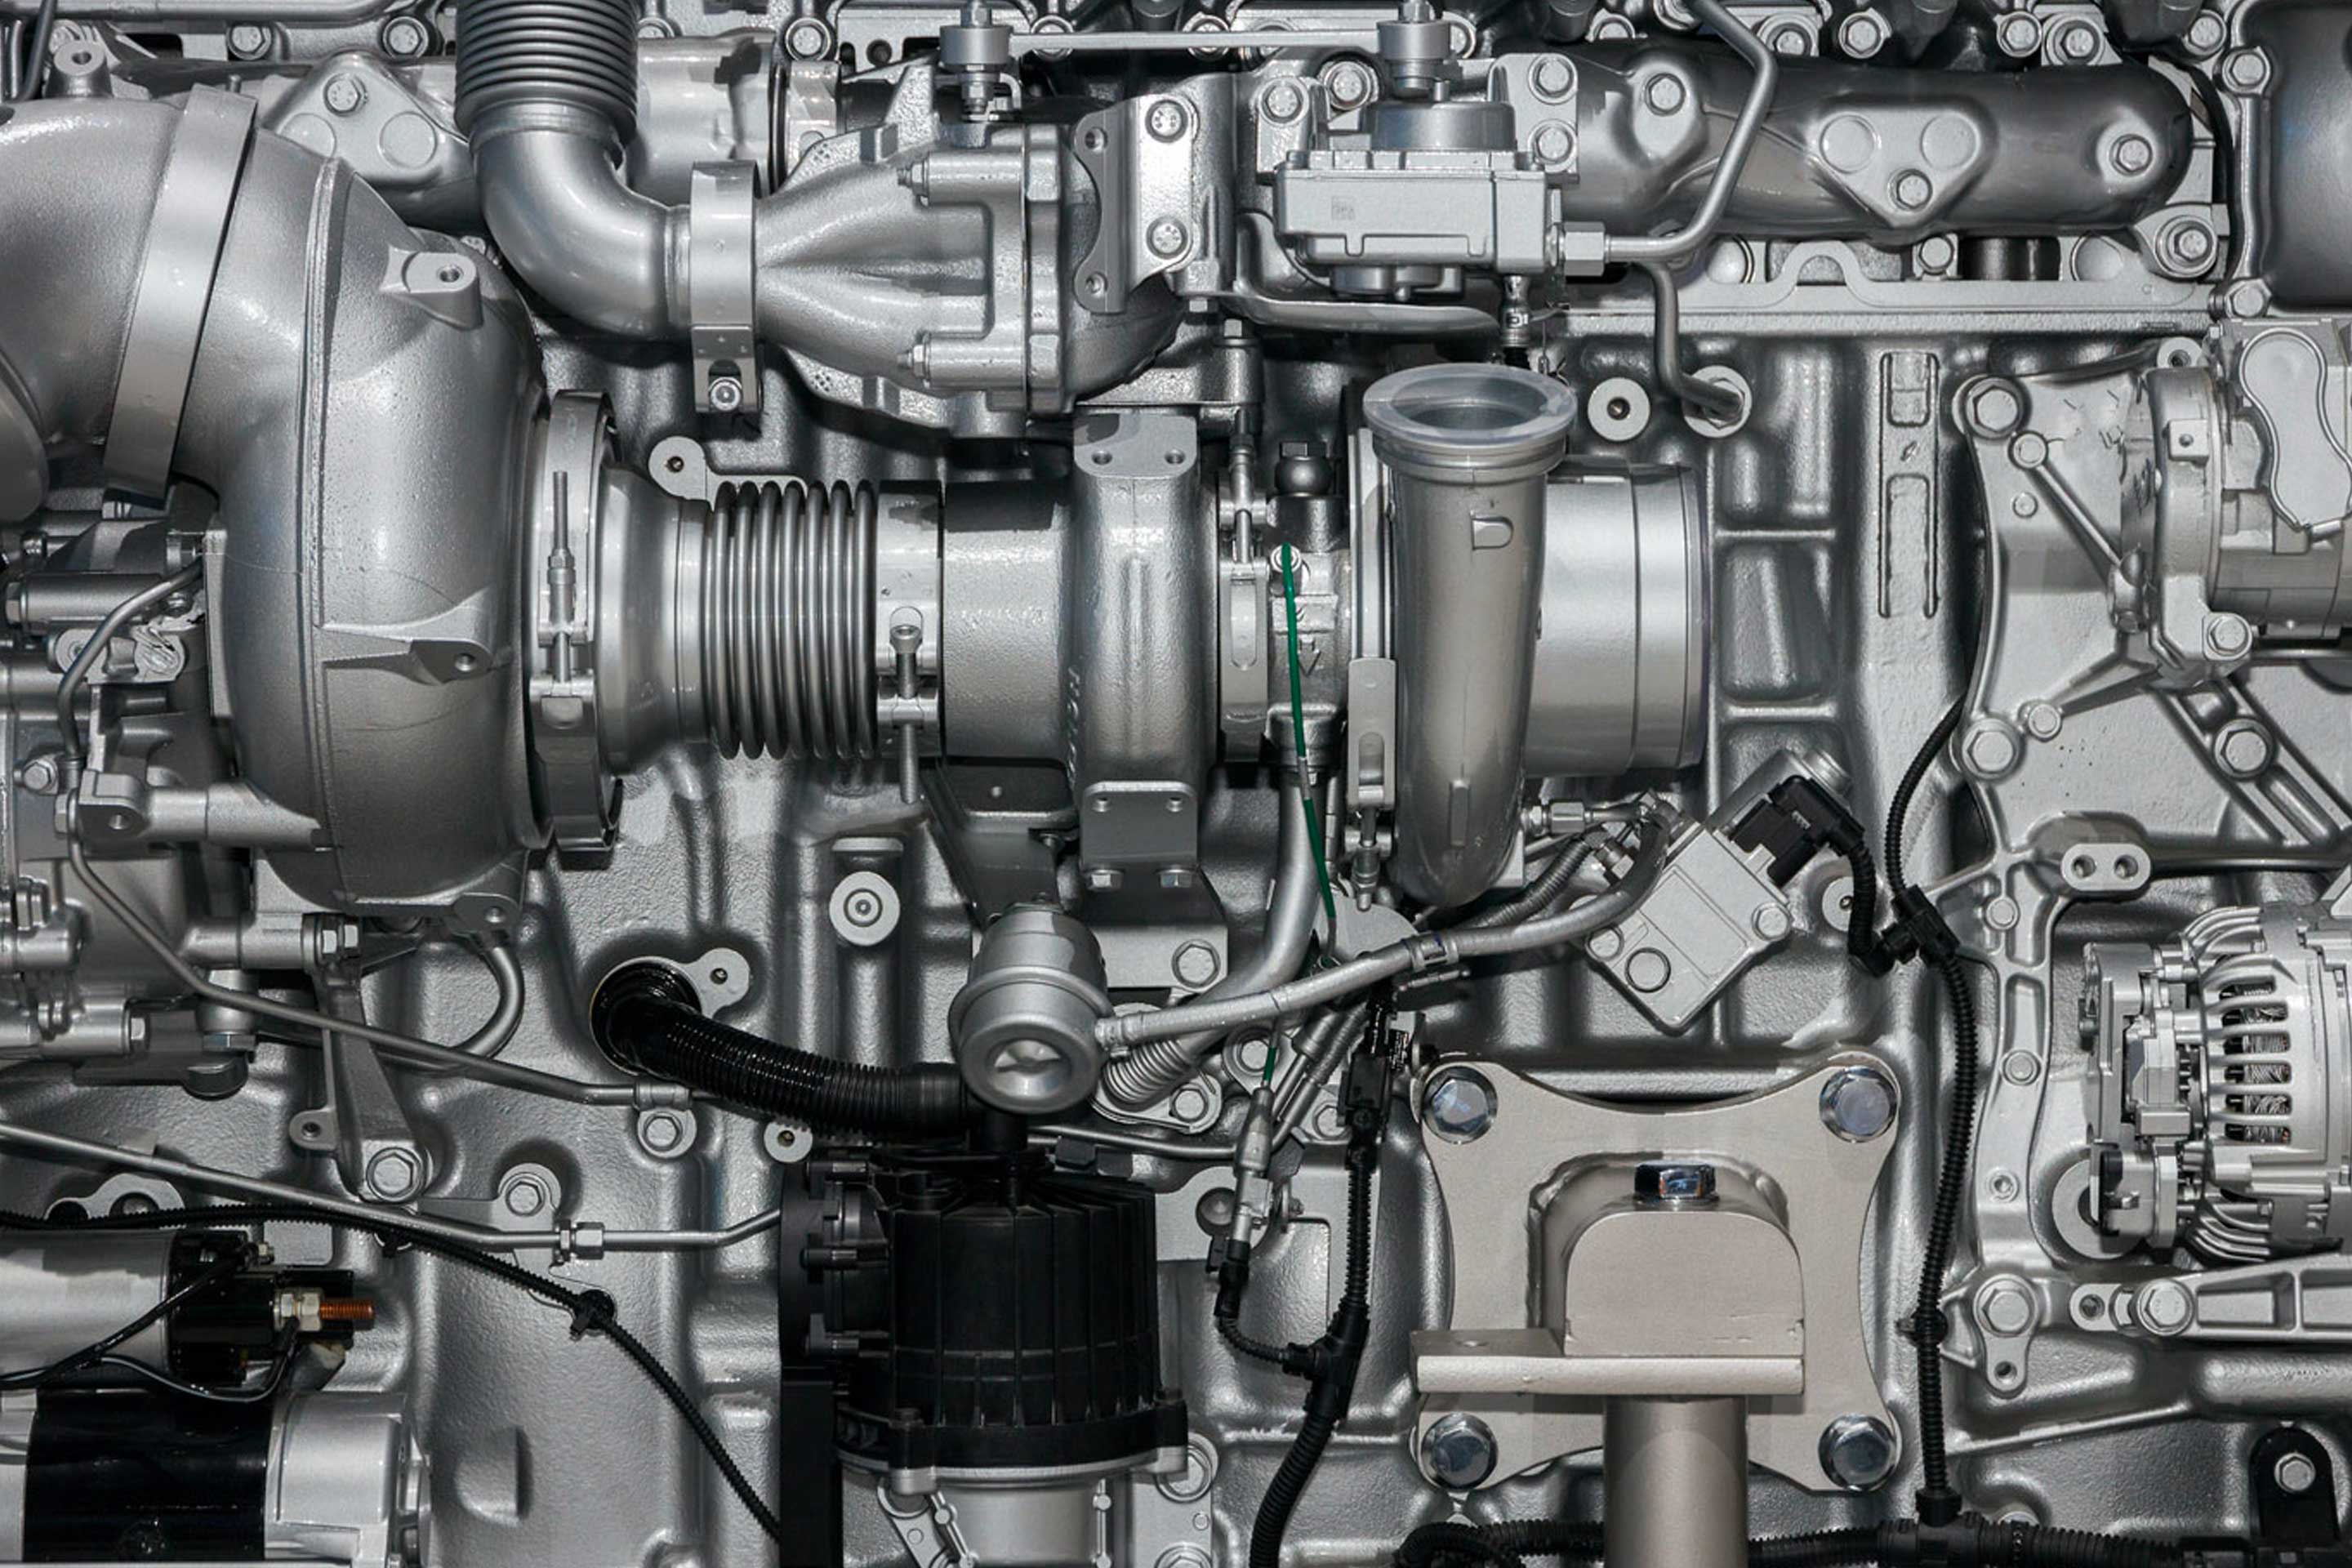 An image of a diesel engine